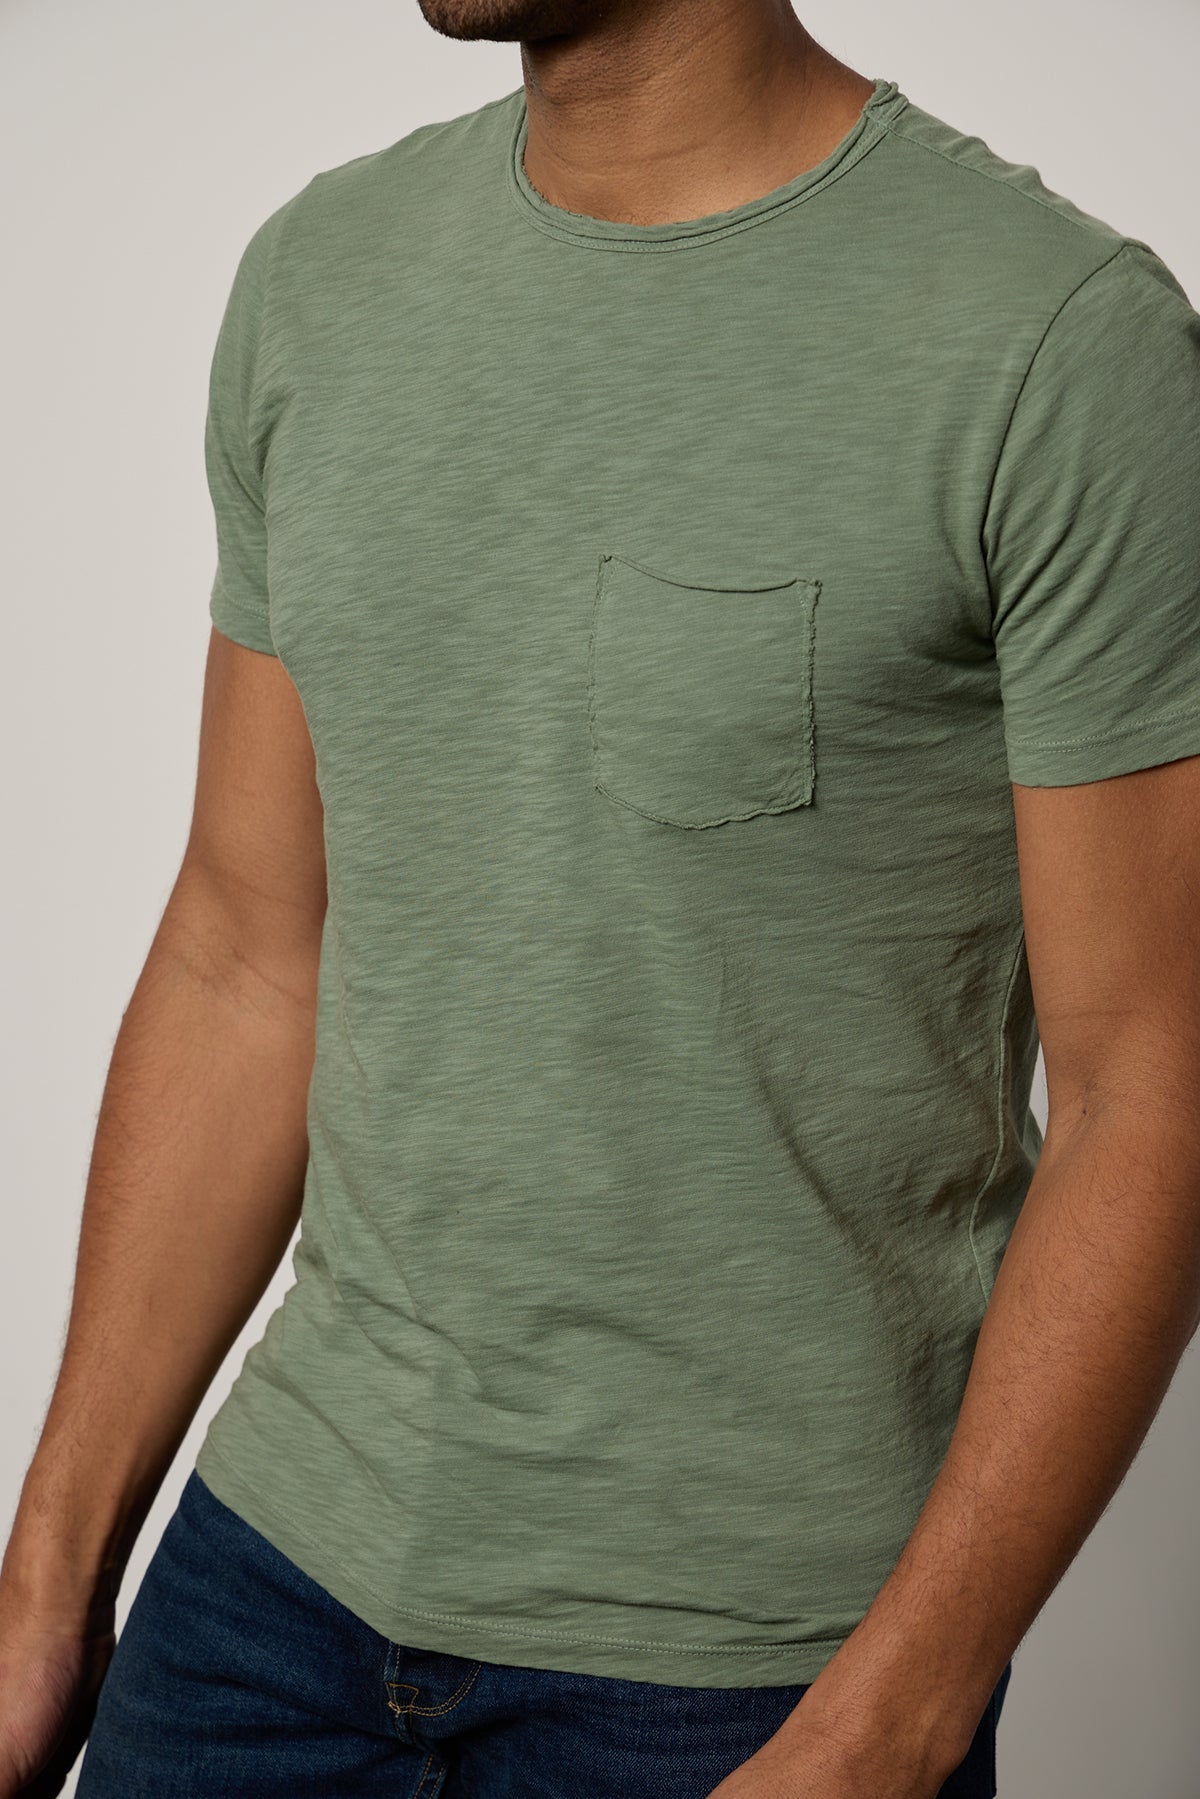   a man wearing a green CHAD RAW EDGE COTTON SLUB POCKET TEE by Velvet by Graham & Spencer. 